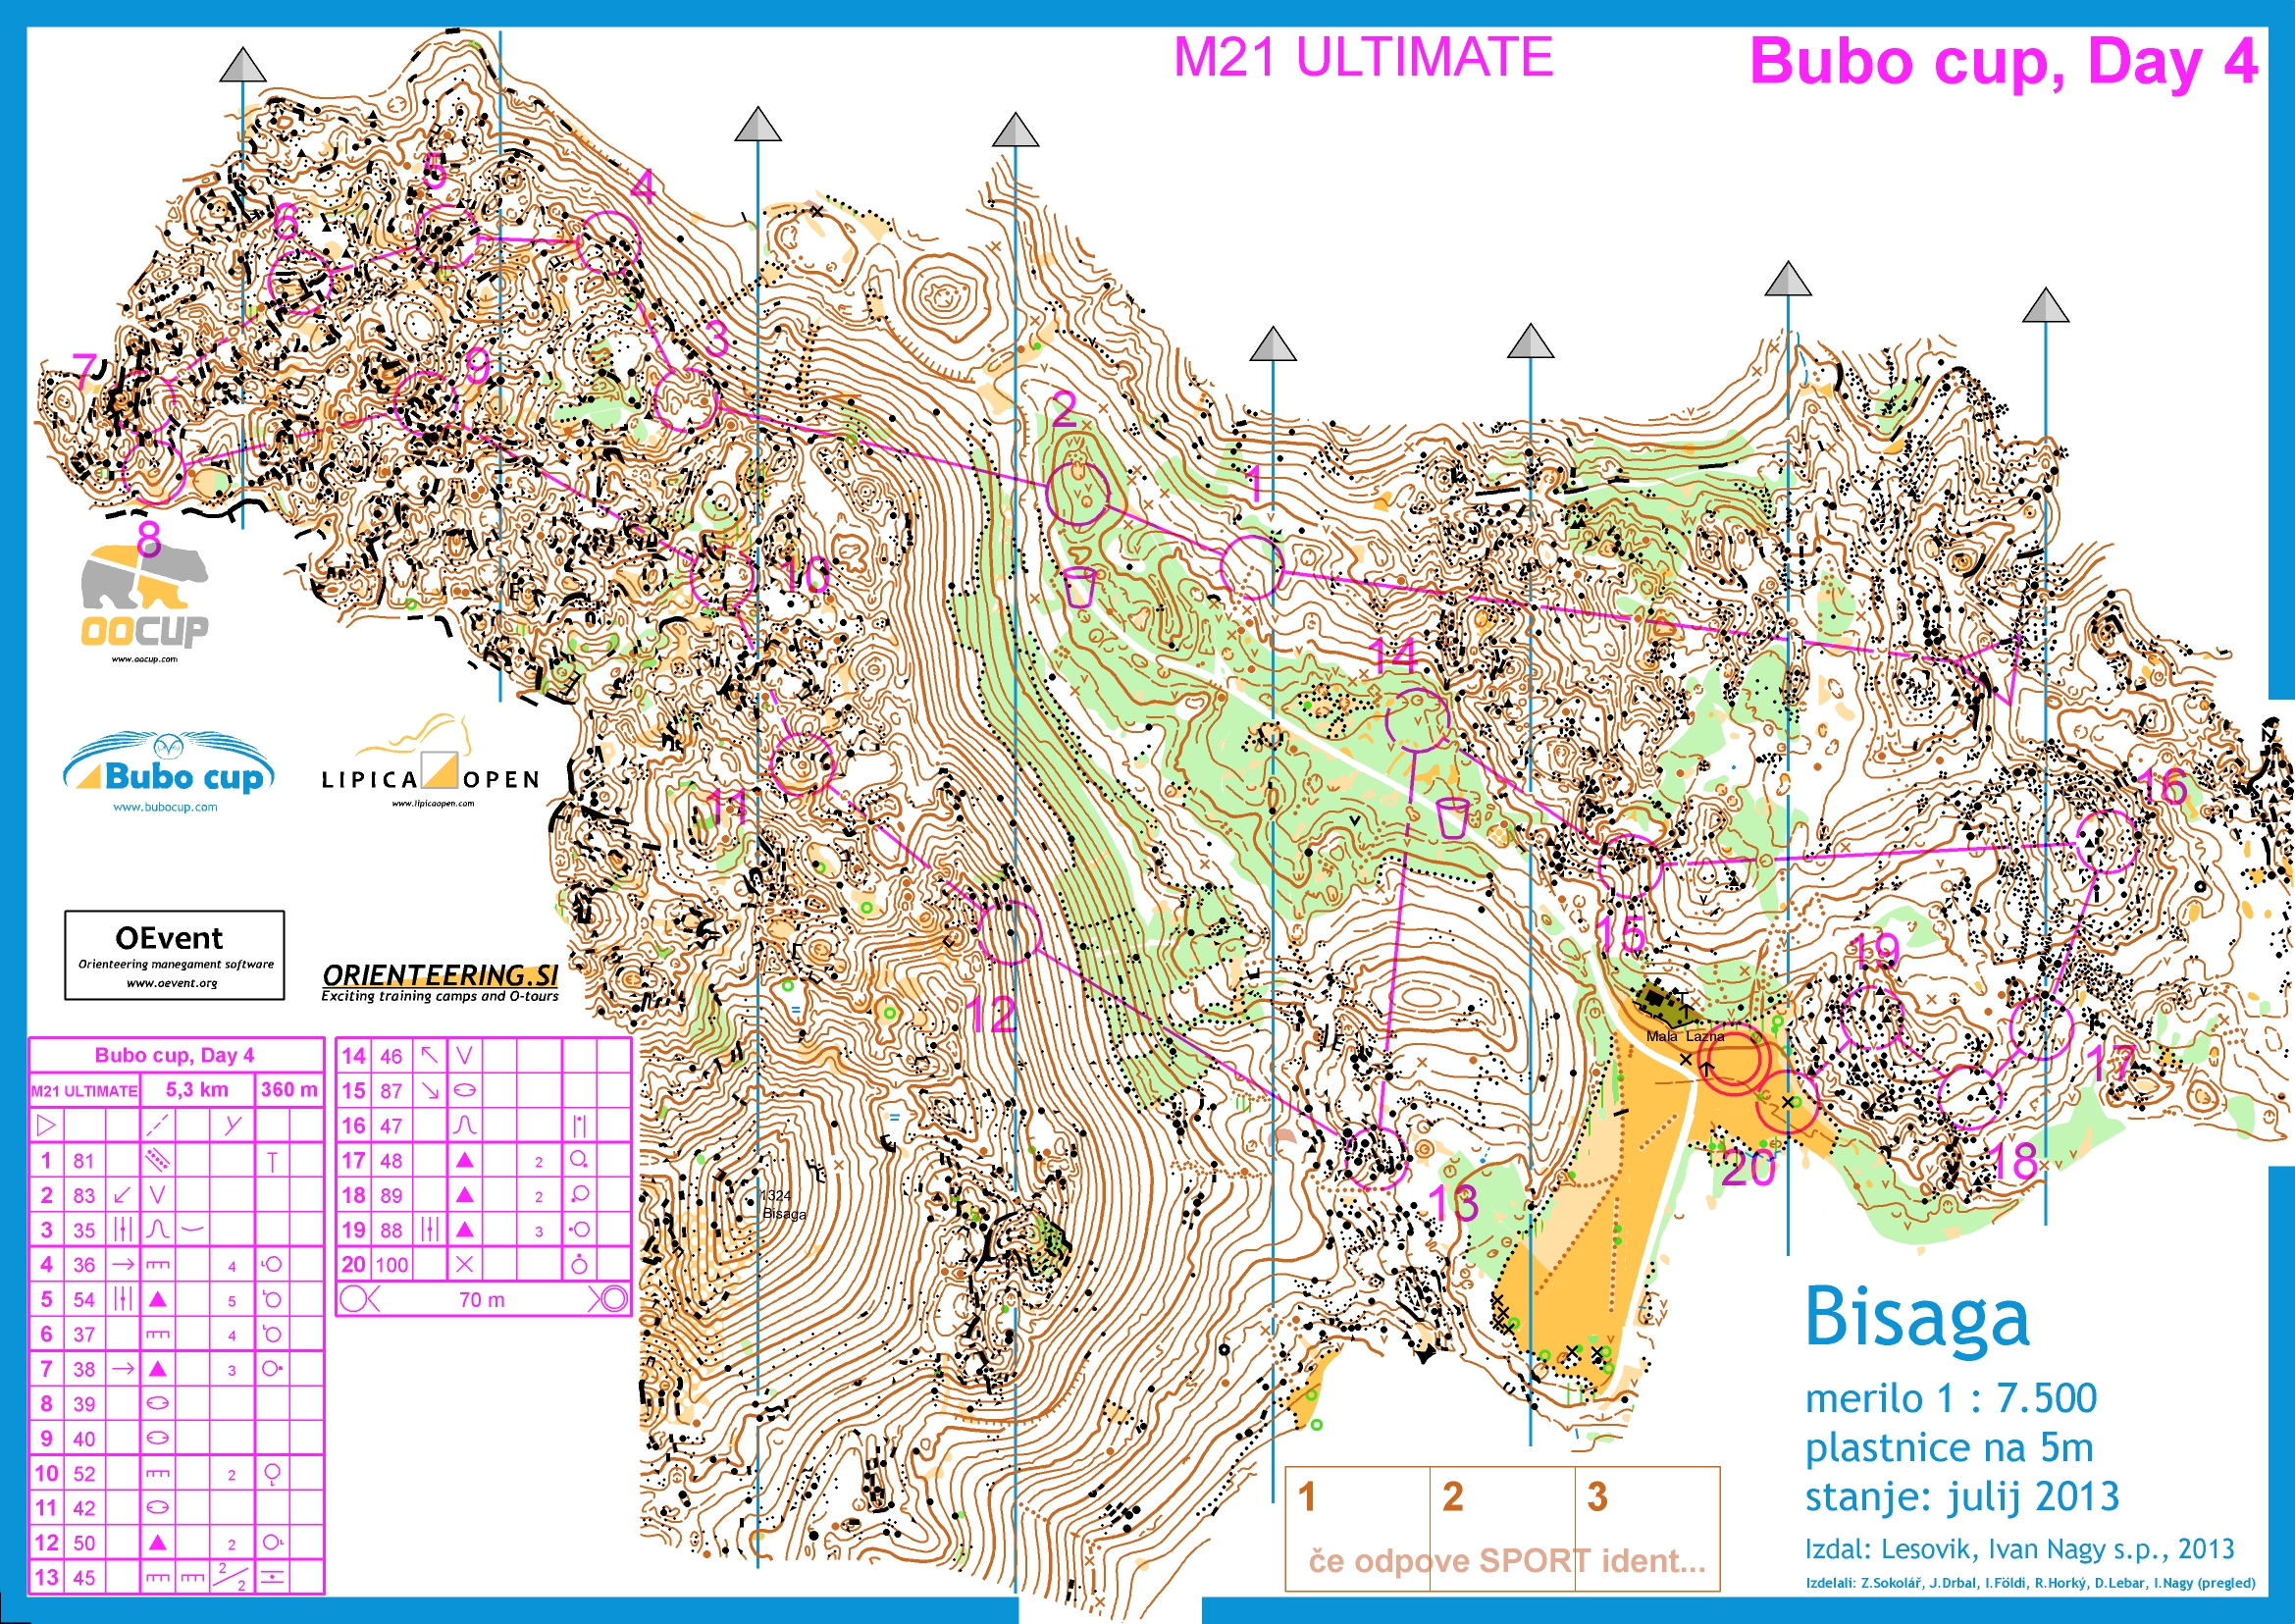 Bubo cup, Stage 4 M21 ULTIMATE (19/07/2013)